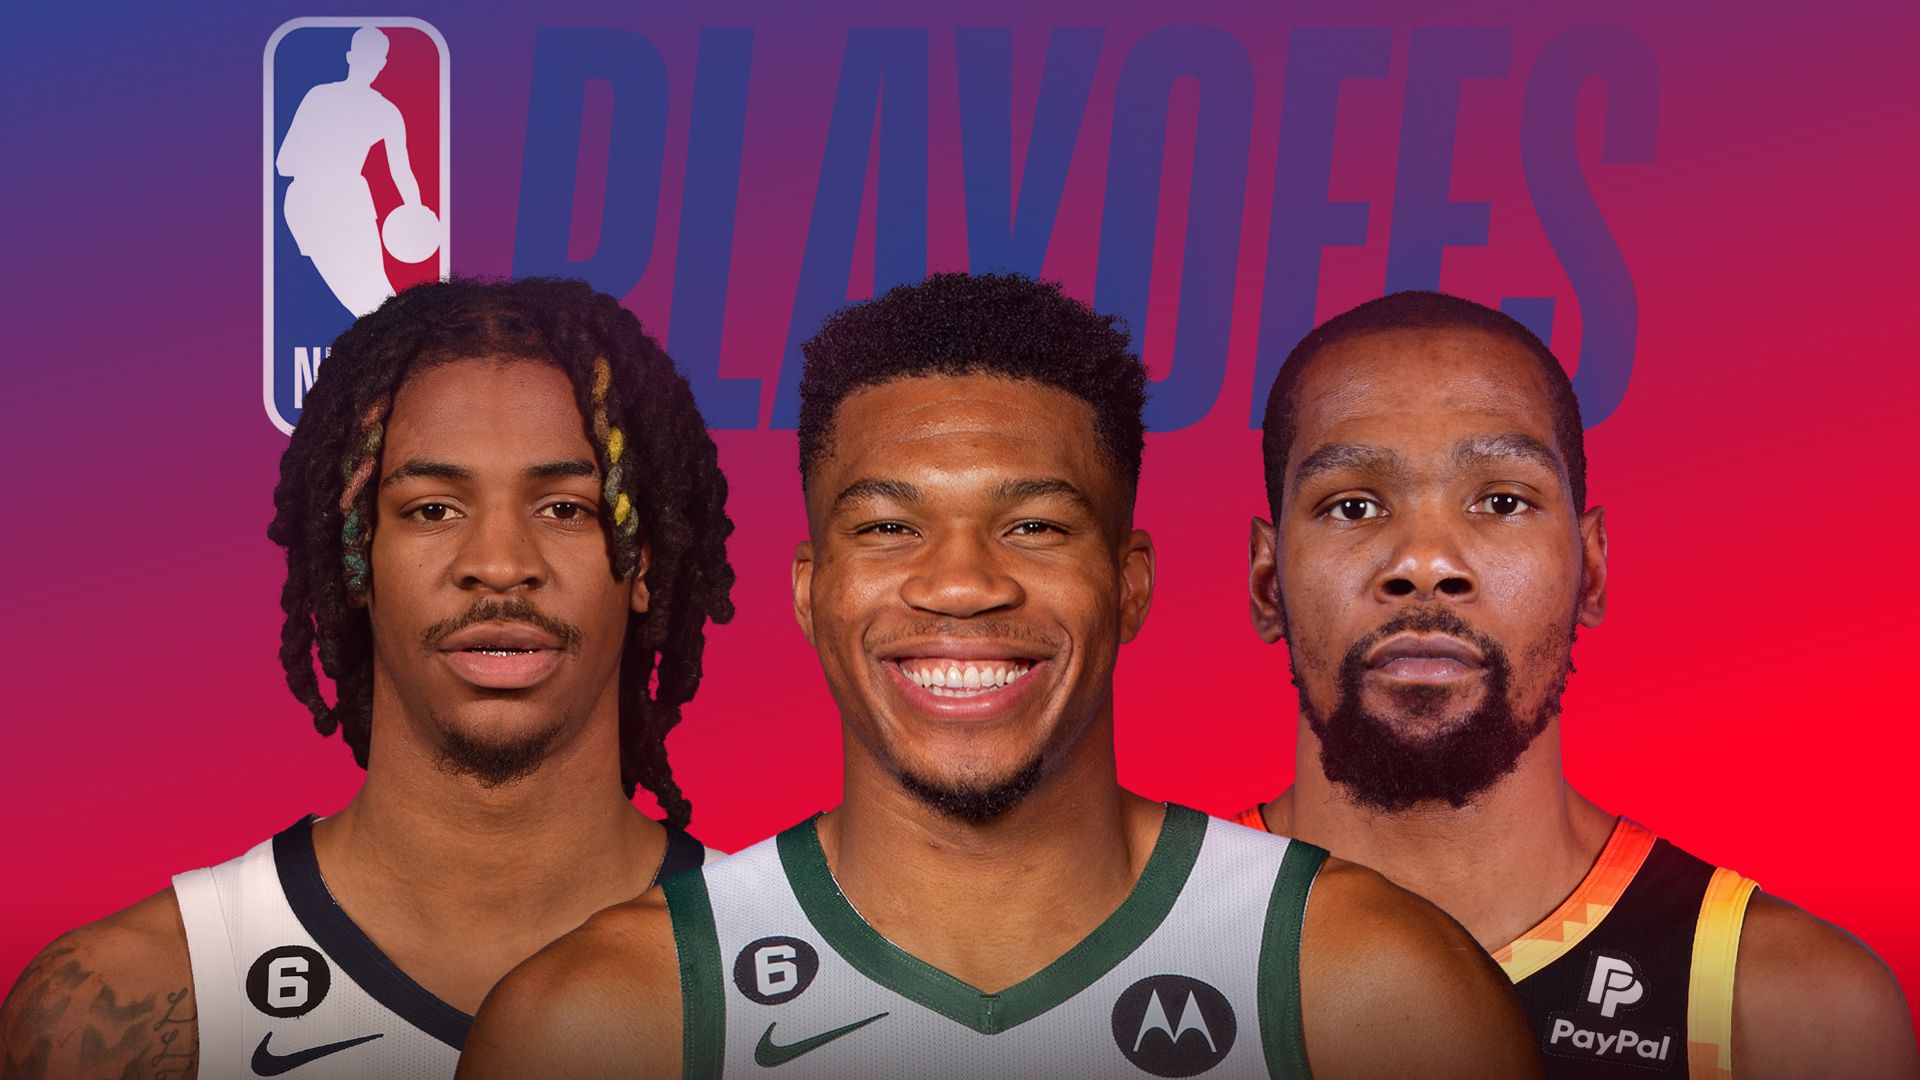 2023 NBA Playoffs: All you need to know ahead of the postseason